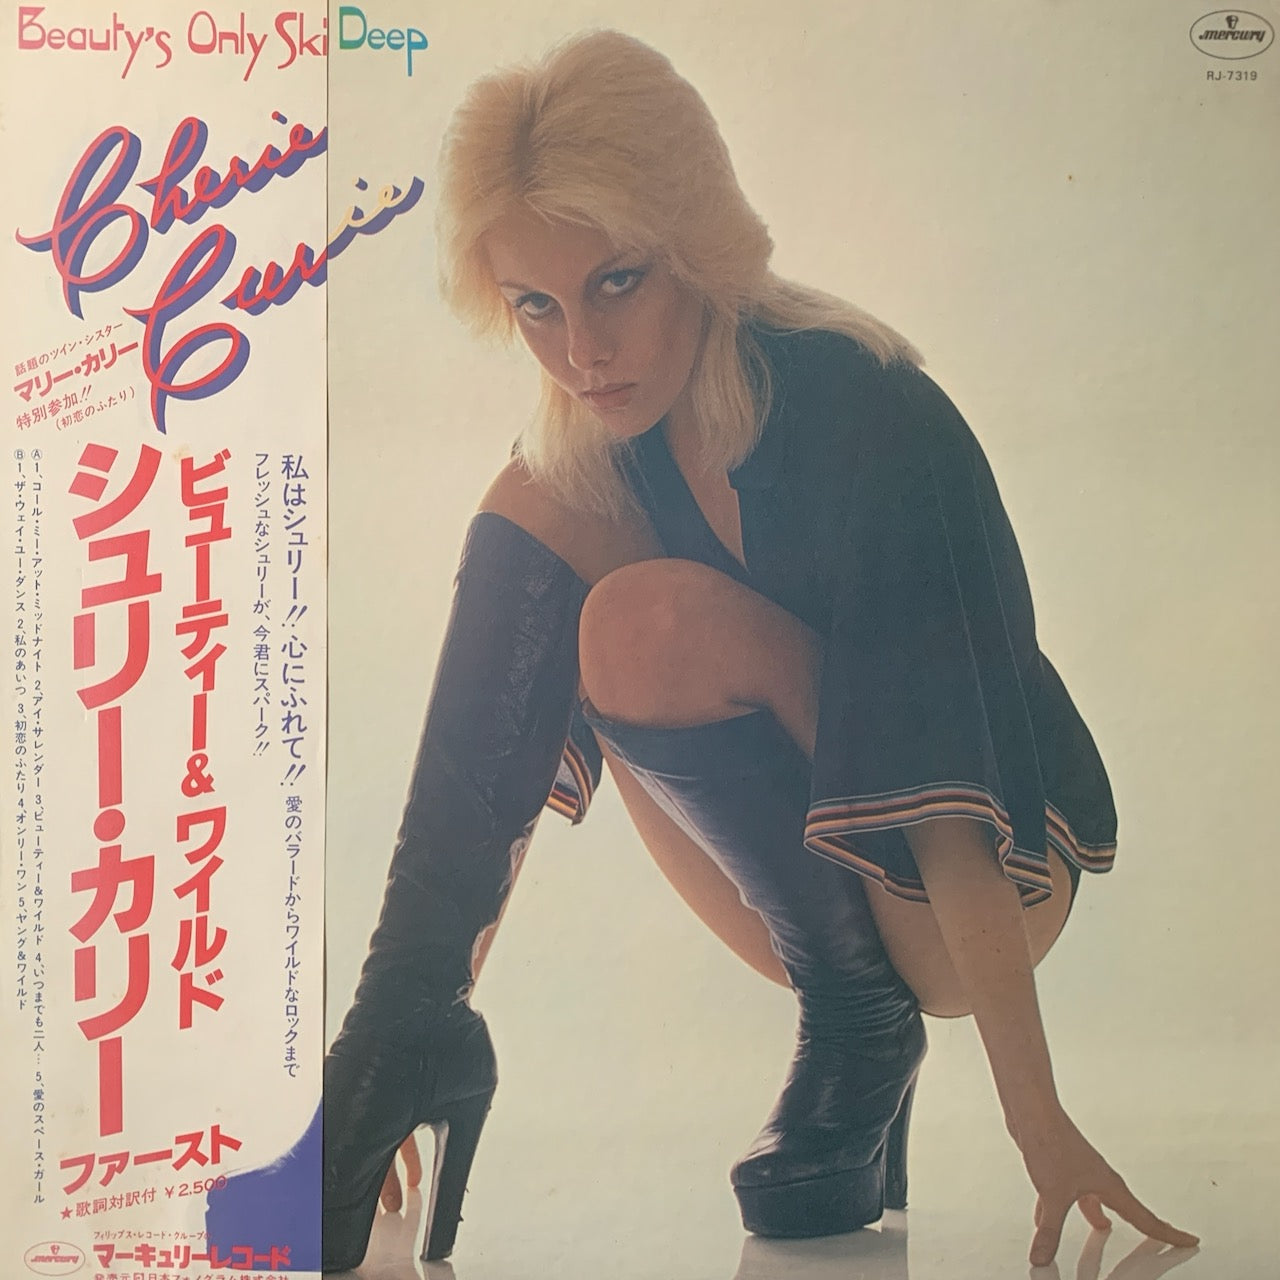 CHERIE CURRIE - BEAUTY'S ONLY SKIN DEEP    NM /NM  1977